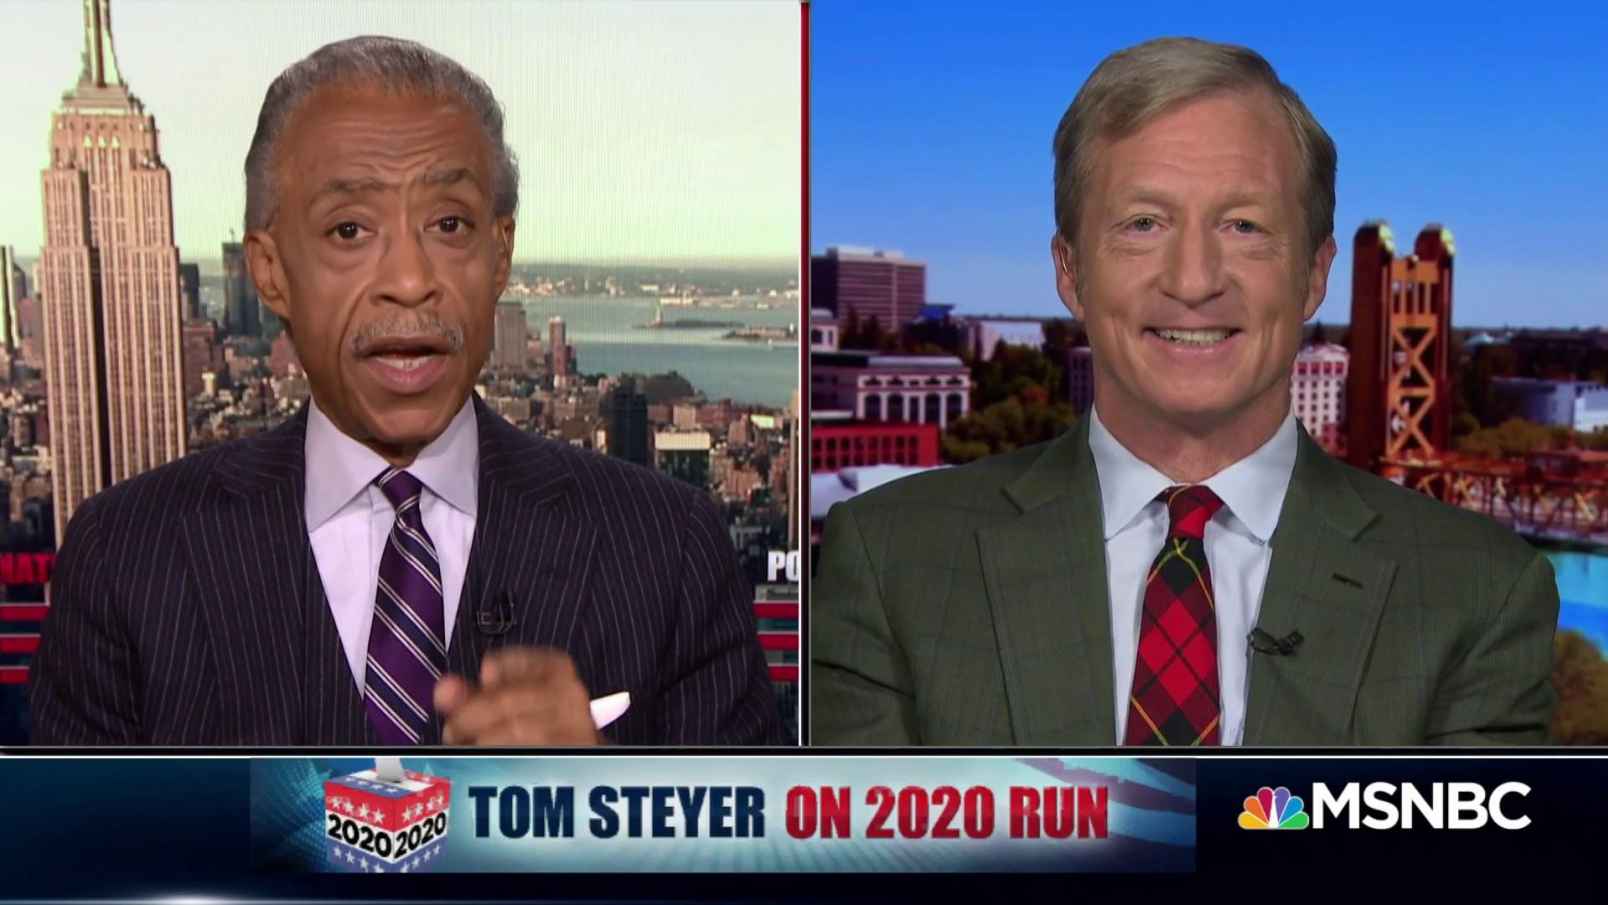 Tom Steyer is on Track to Buy a Spot on the 2020 Debate Stage - Blunt Force Truth